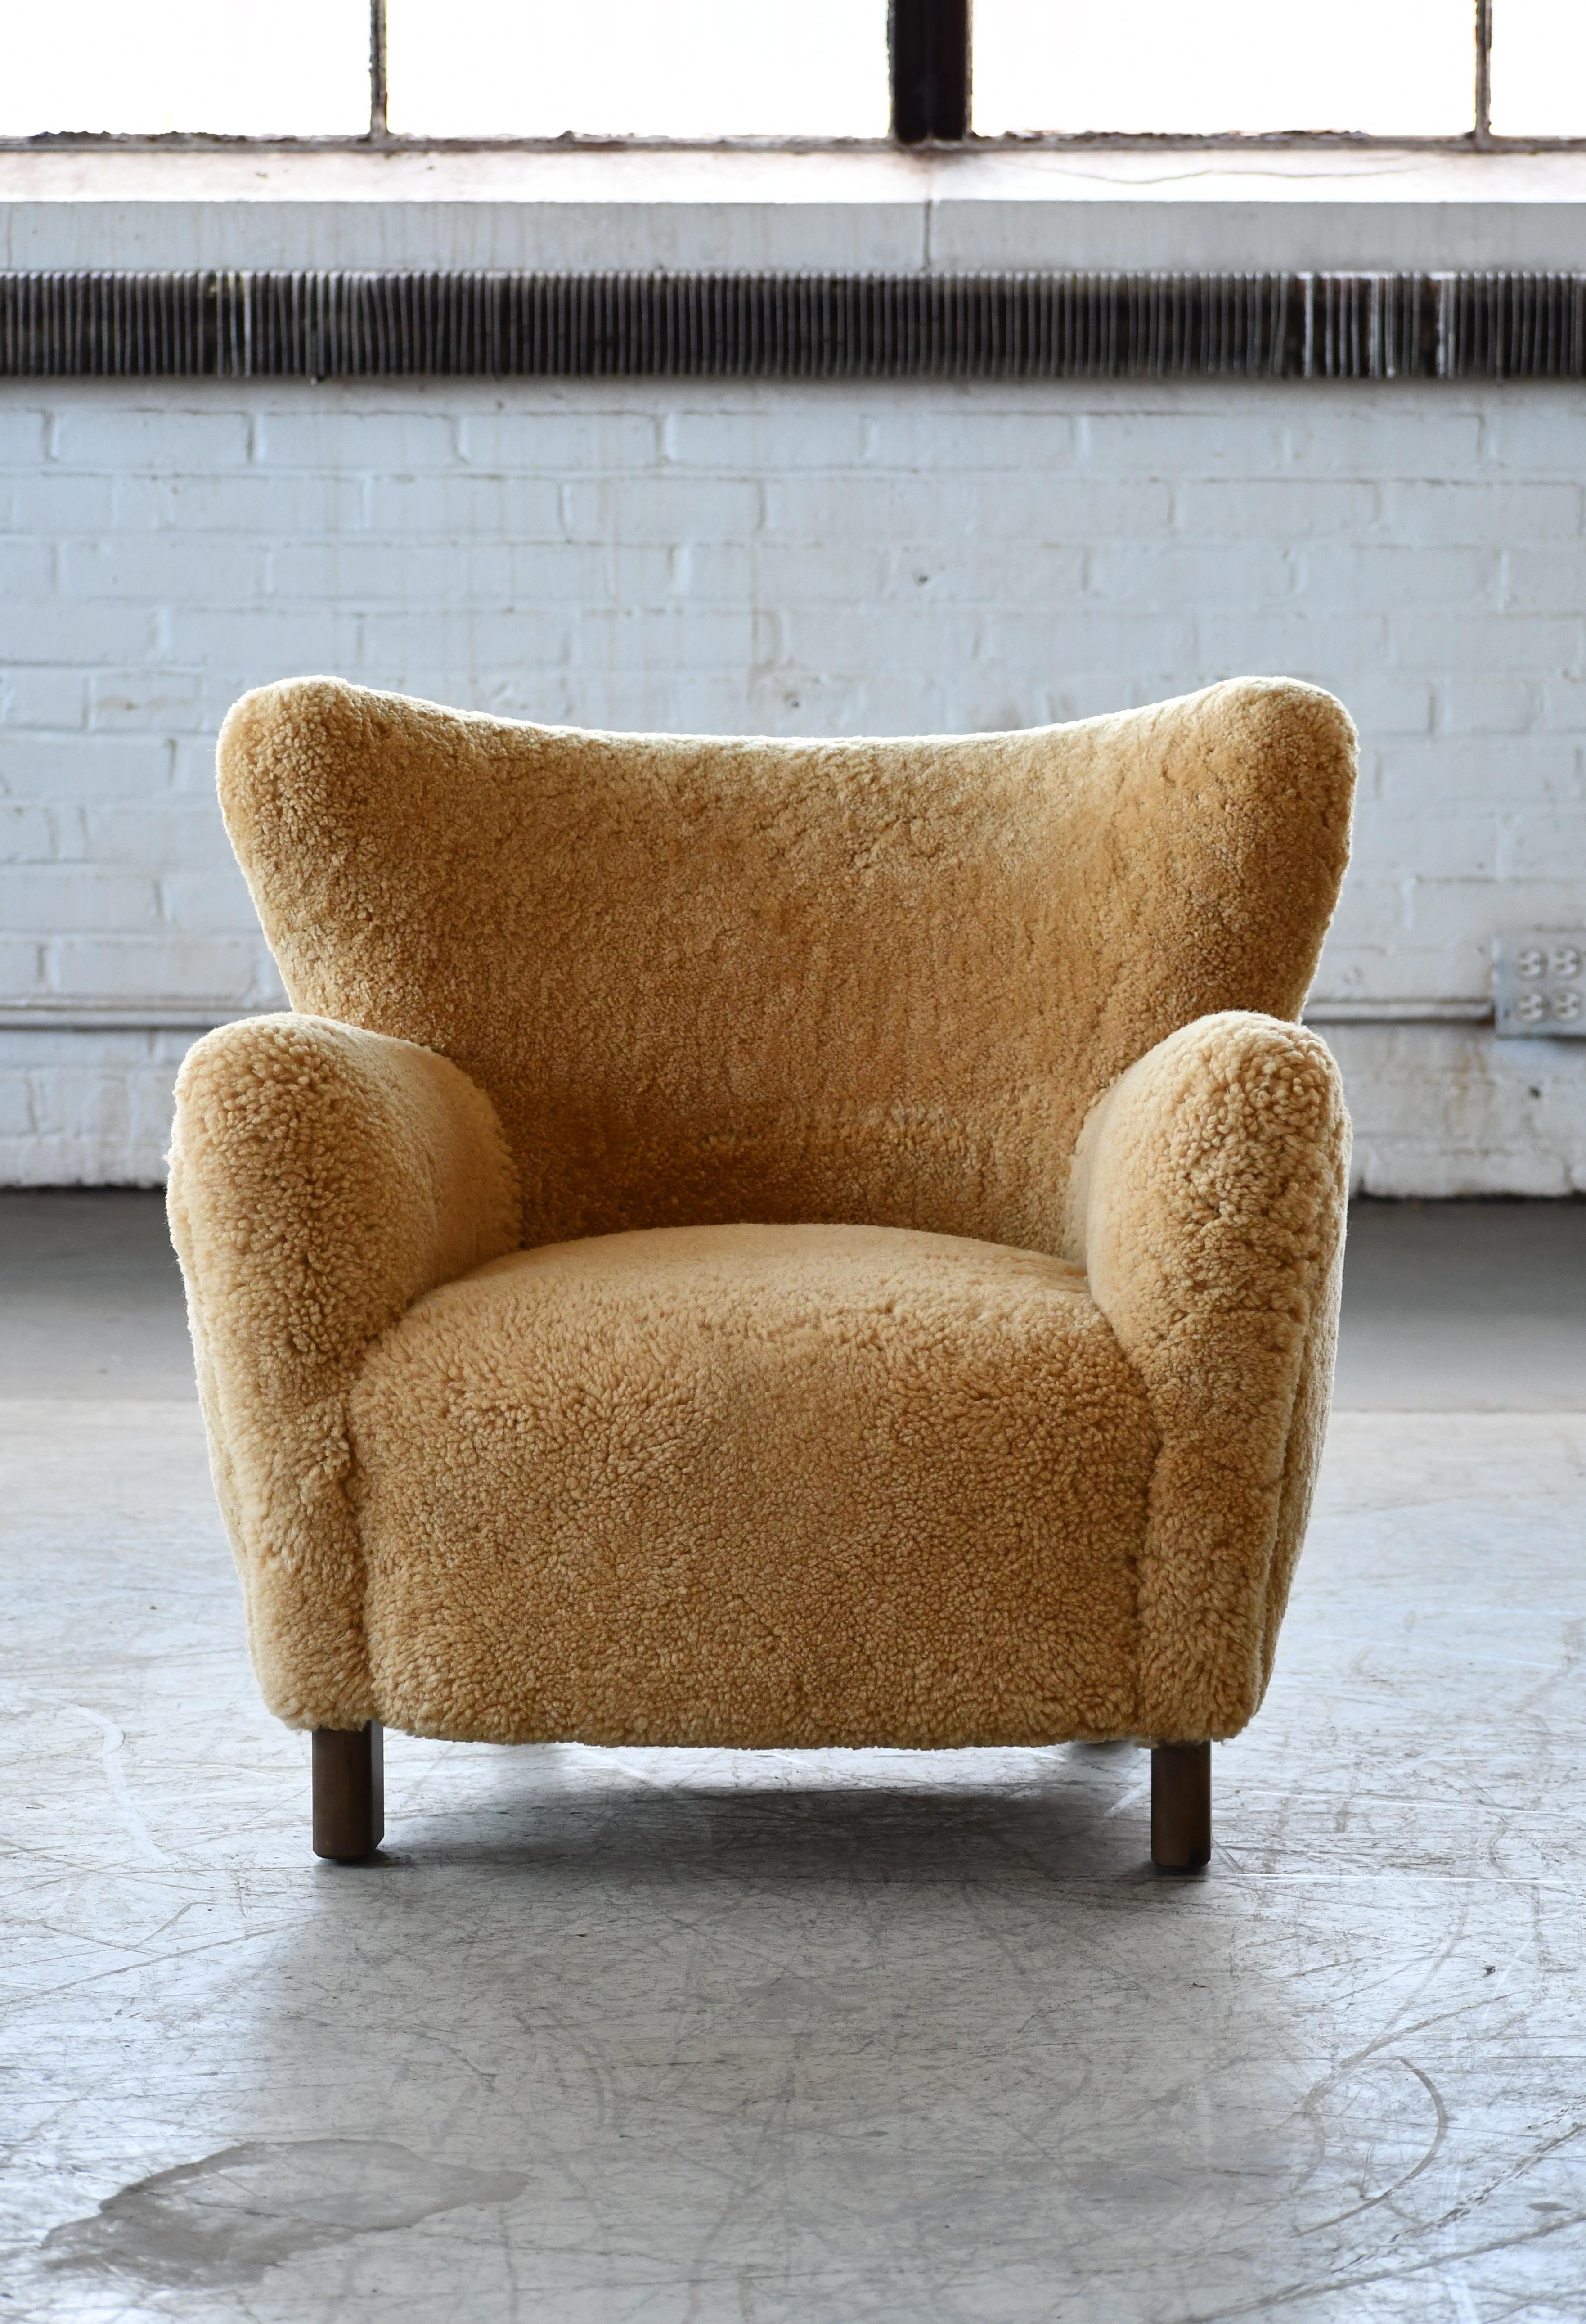 Pair of 1940's Style Classic Club or Lounge Chairs in Amber Color Shearling For Sale 2